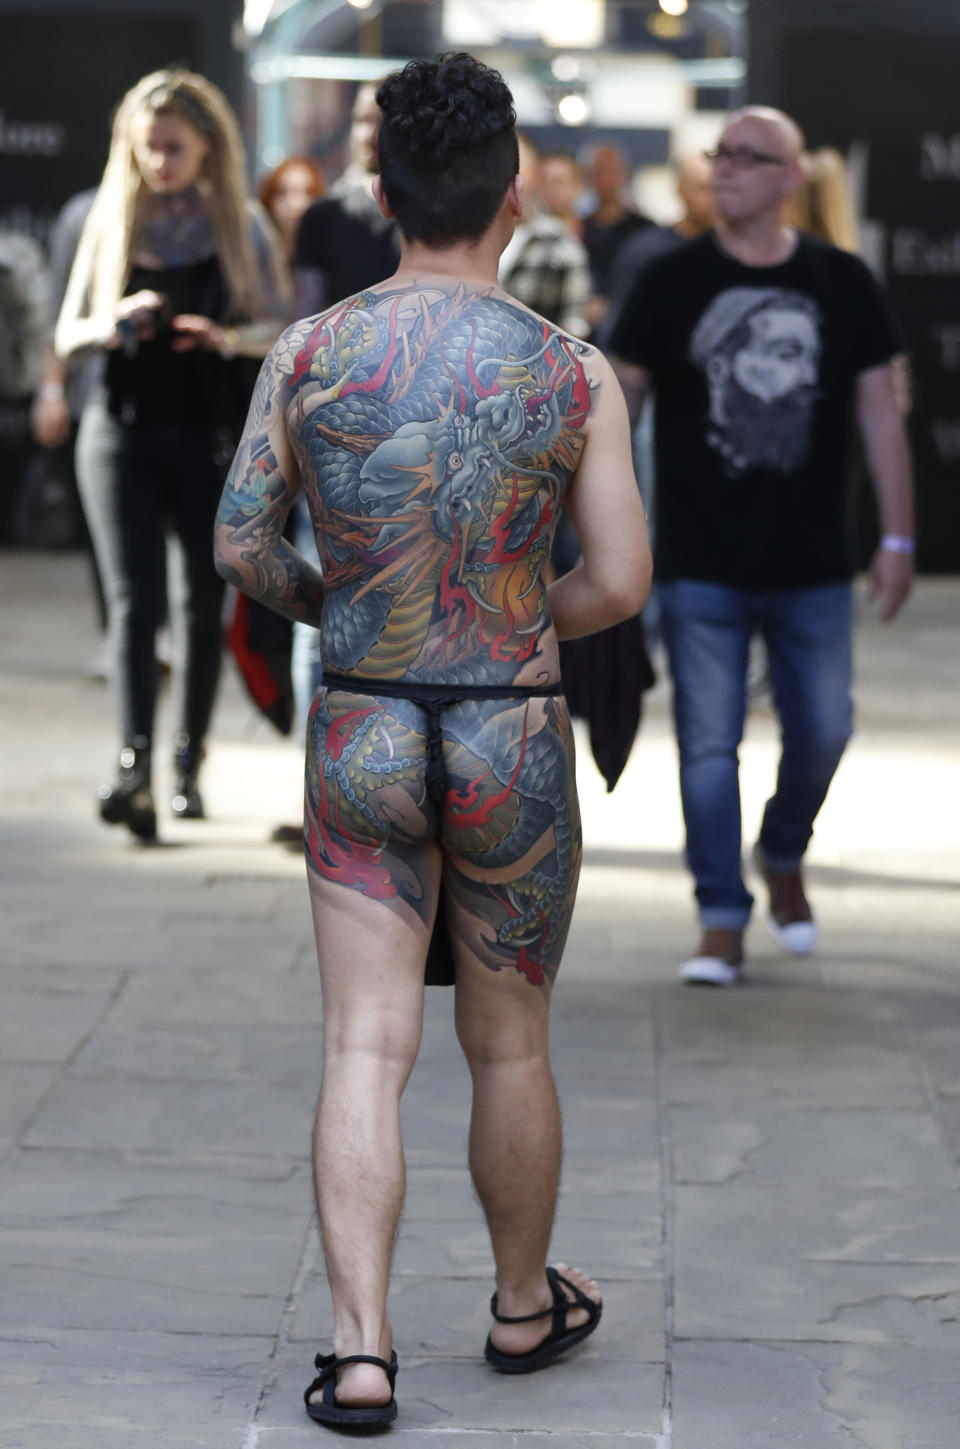 Body artwork takes center stage at the London Tattoo Convention